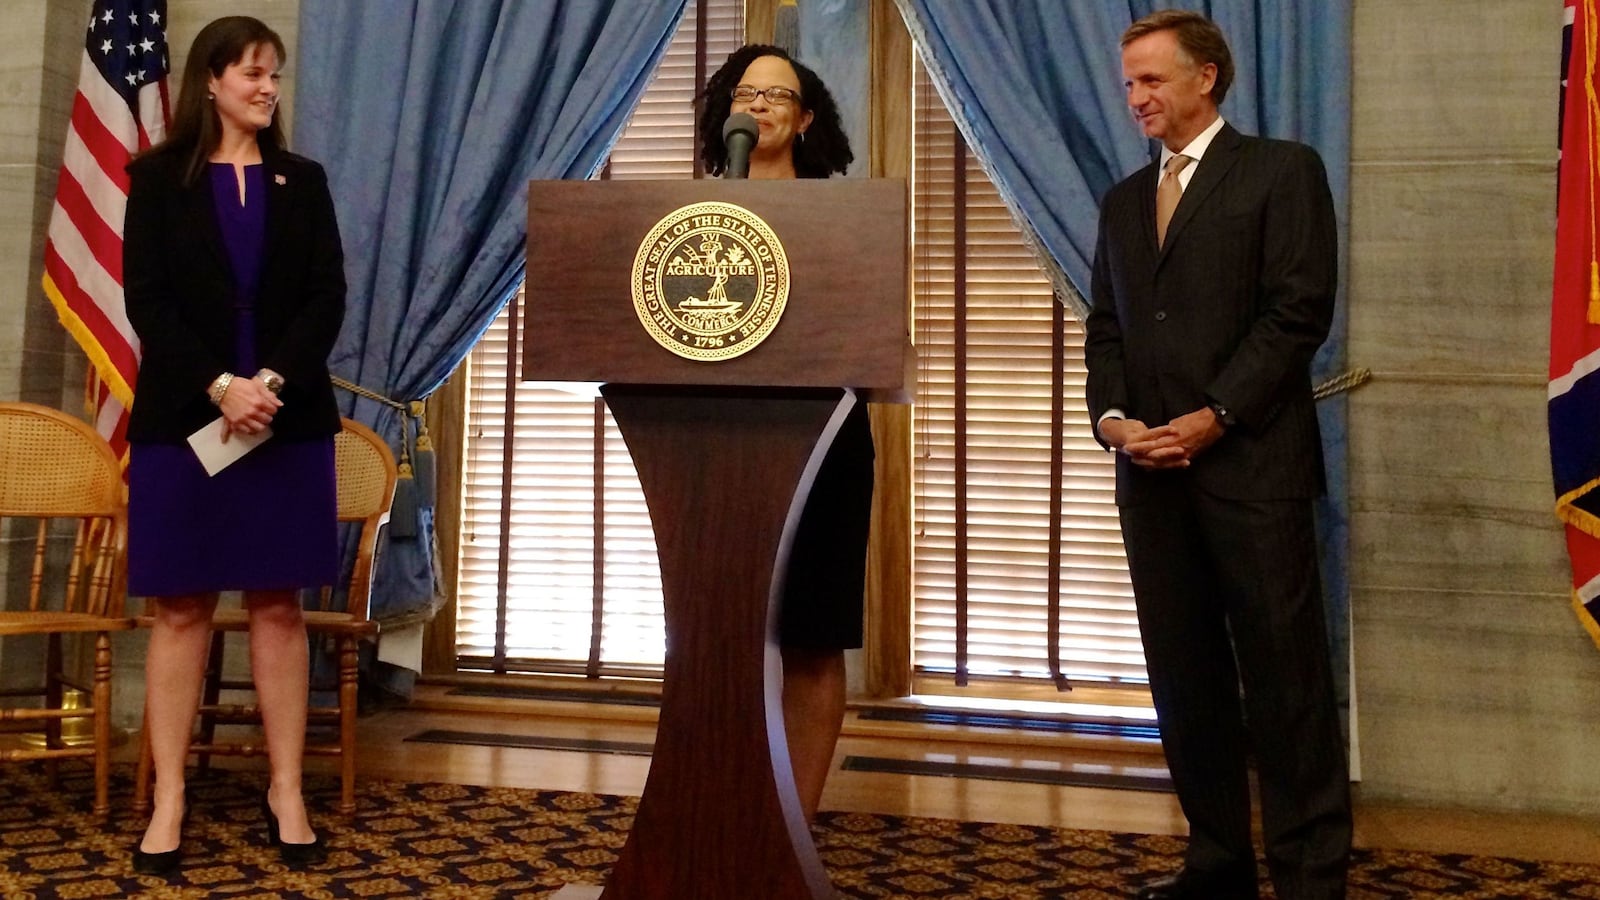 Malika Anderson was named superintendent of the Achievement School District in 2015 at the State Capitol, where she was flanked by Education Commissioner Candice McQueen and Gov. Bill Haslam.